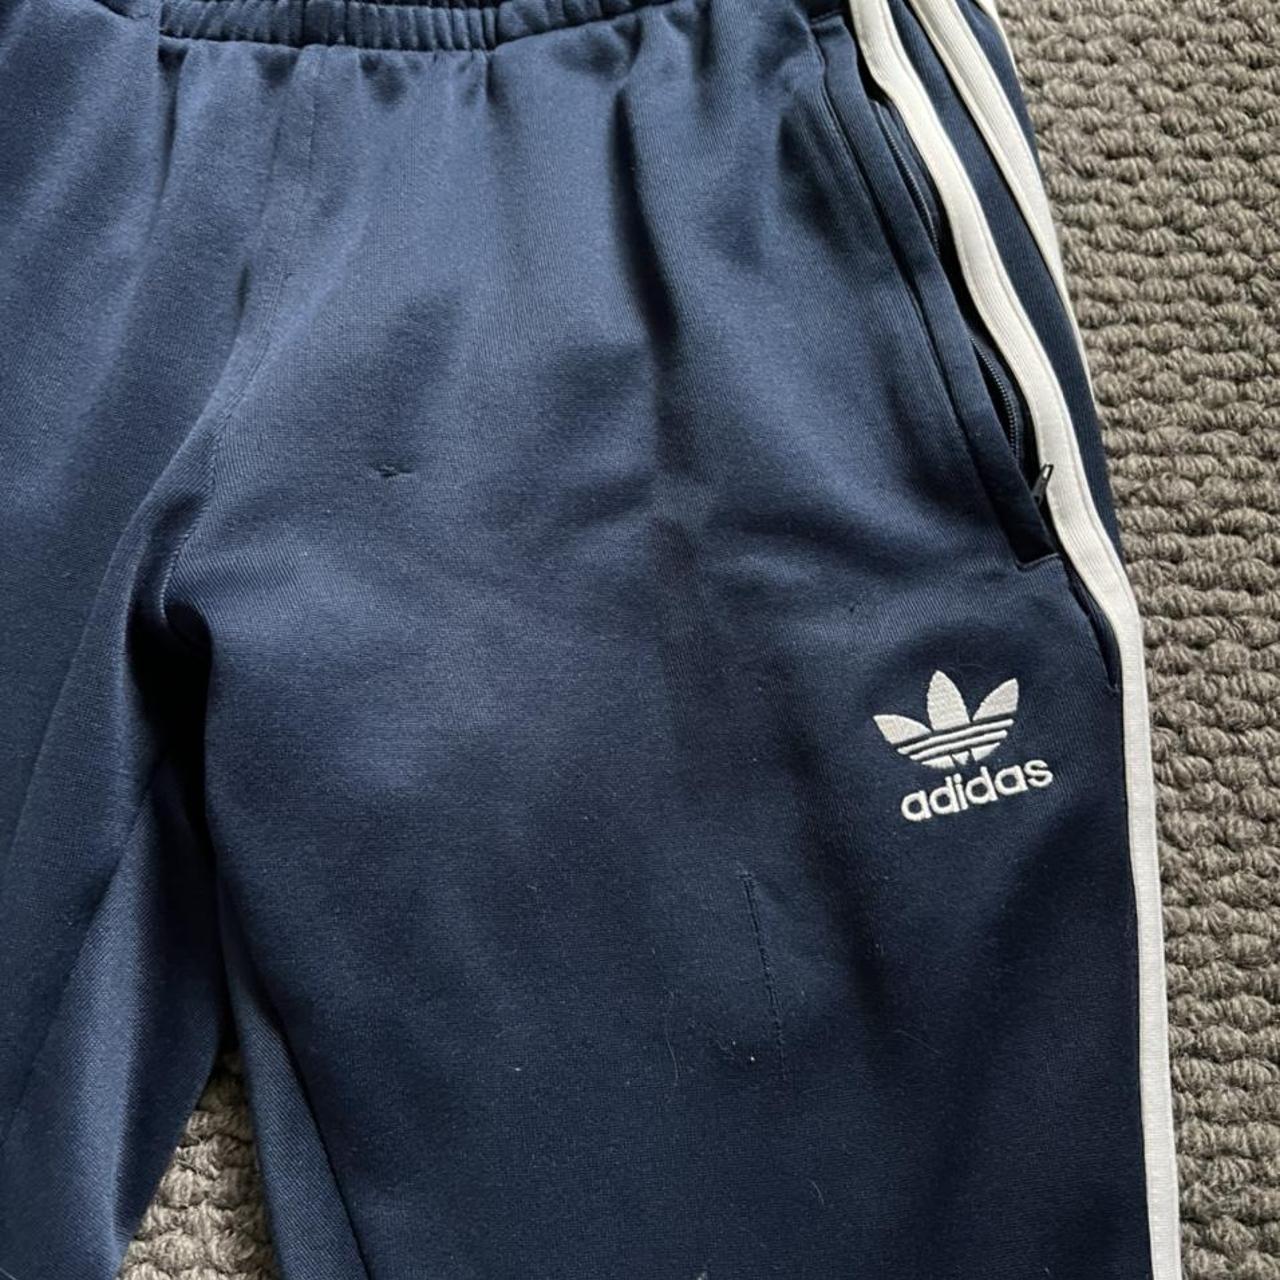 Adidas tracksuit. Minor rips and tears - Depop